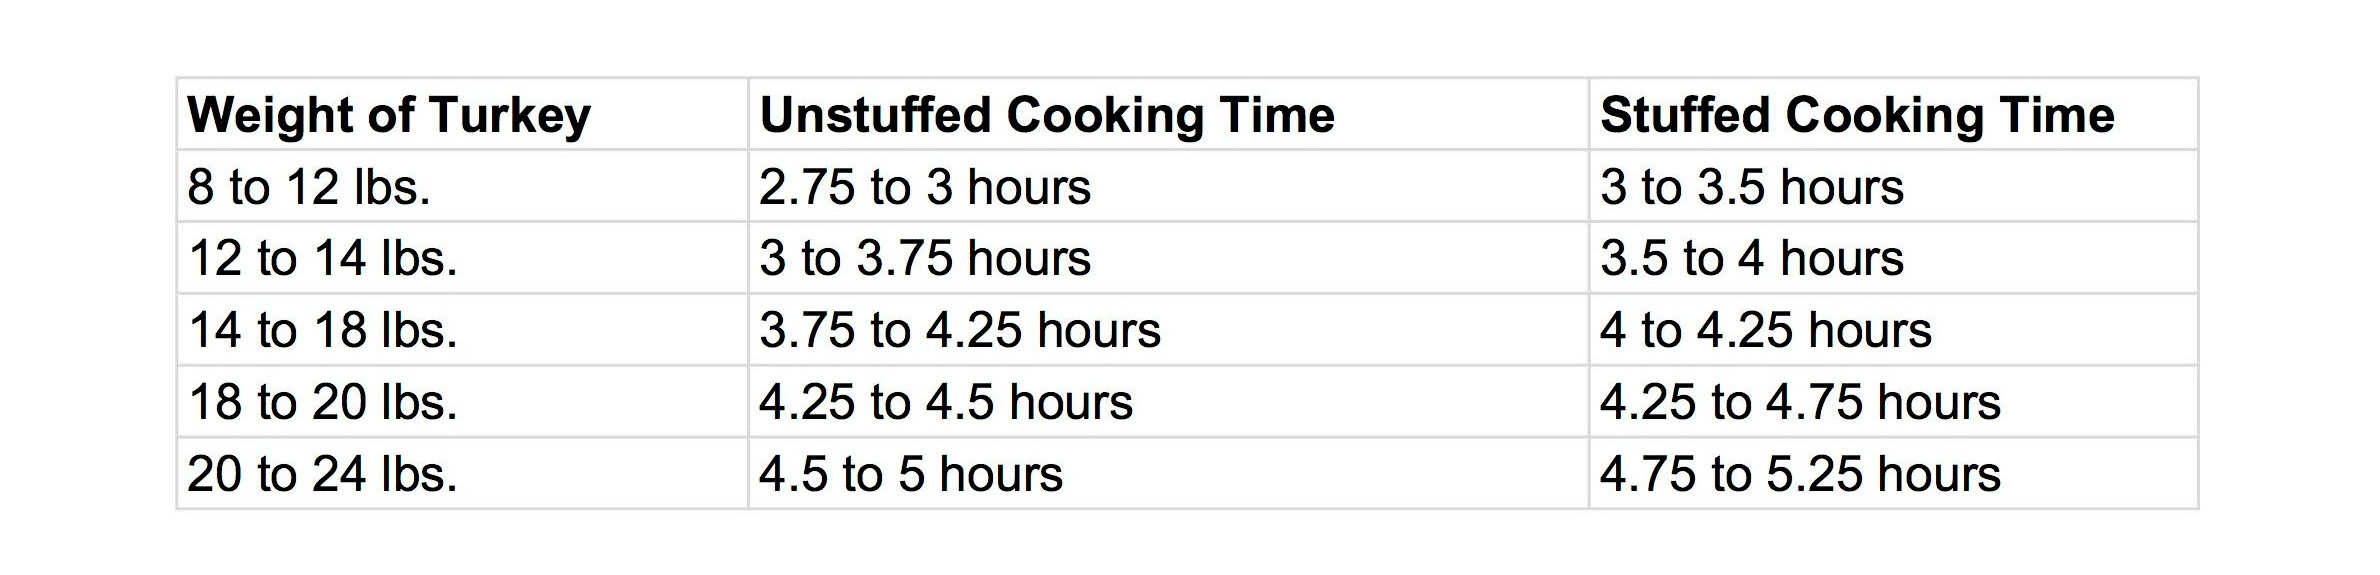 Turkey Cooking Time Chart